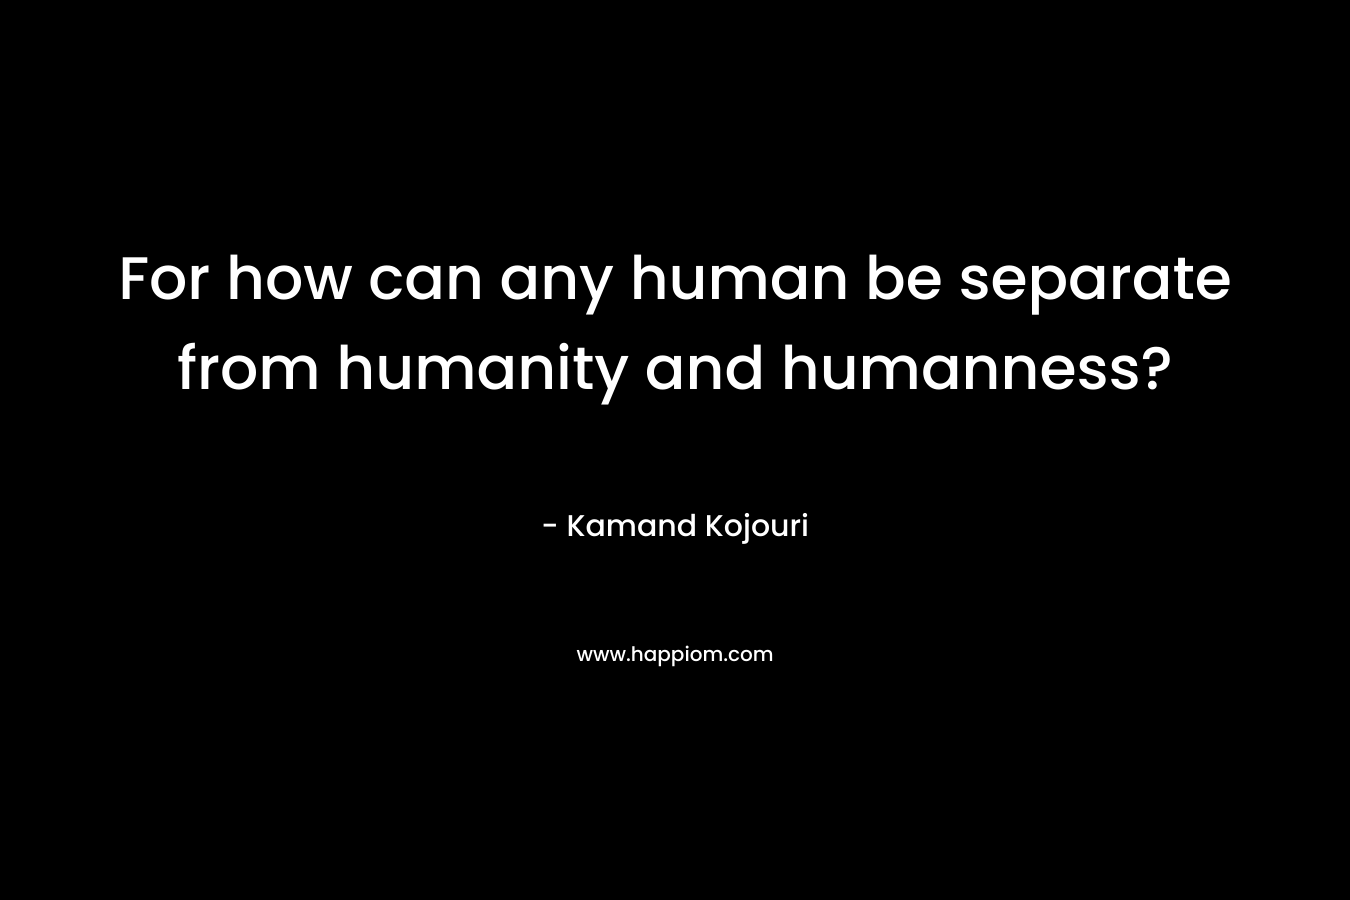 For how can any human be separate from humanity and humanness? – Kamand Kojouri